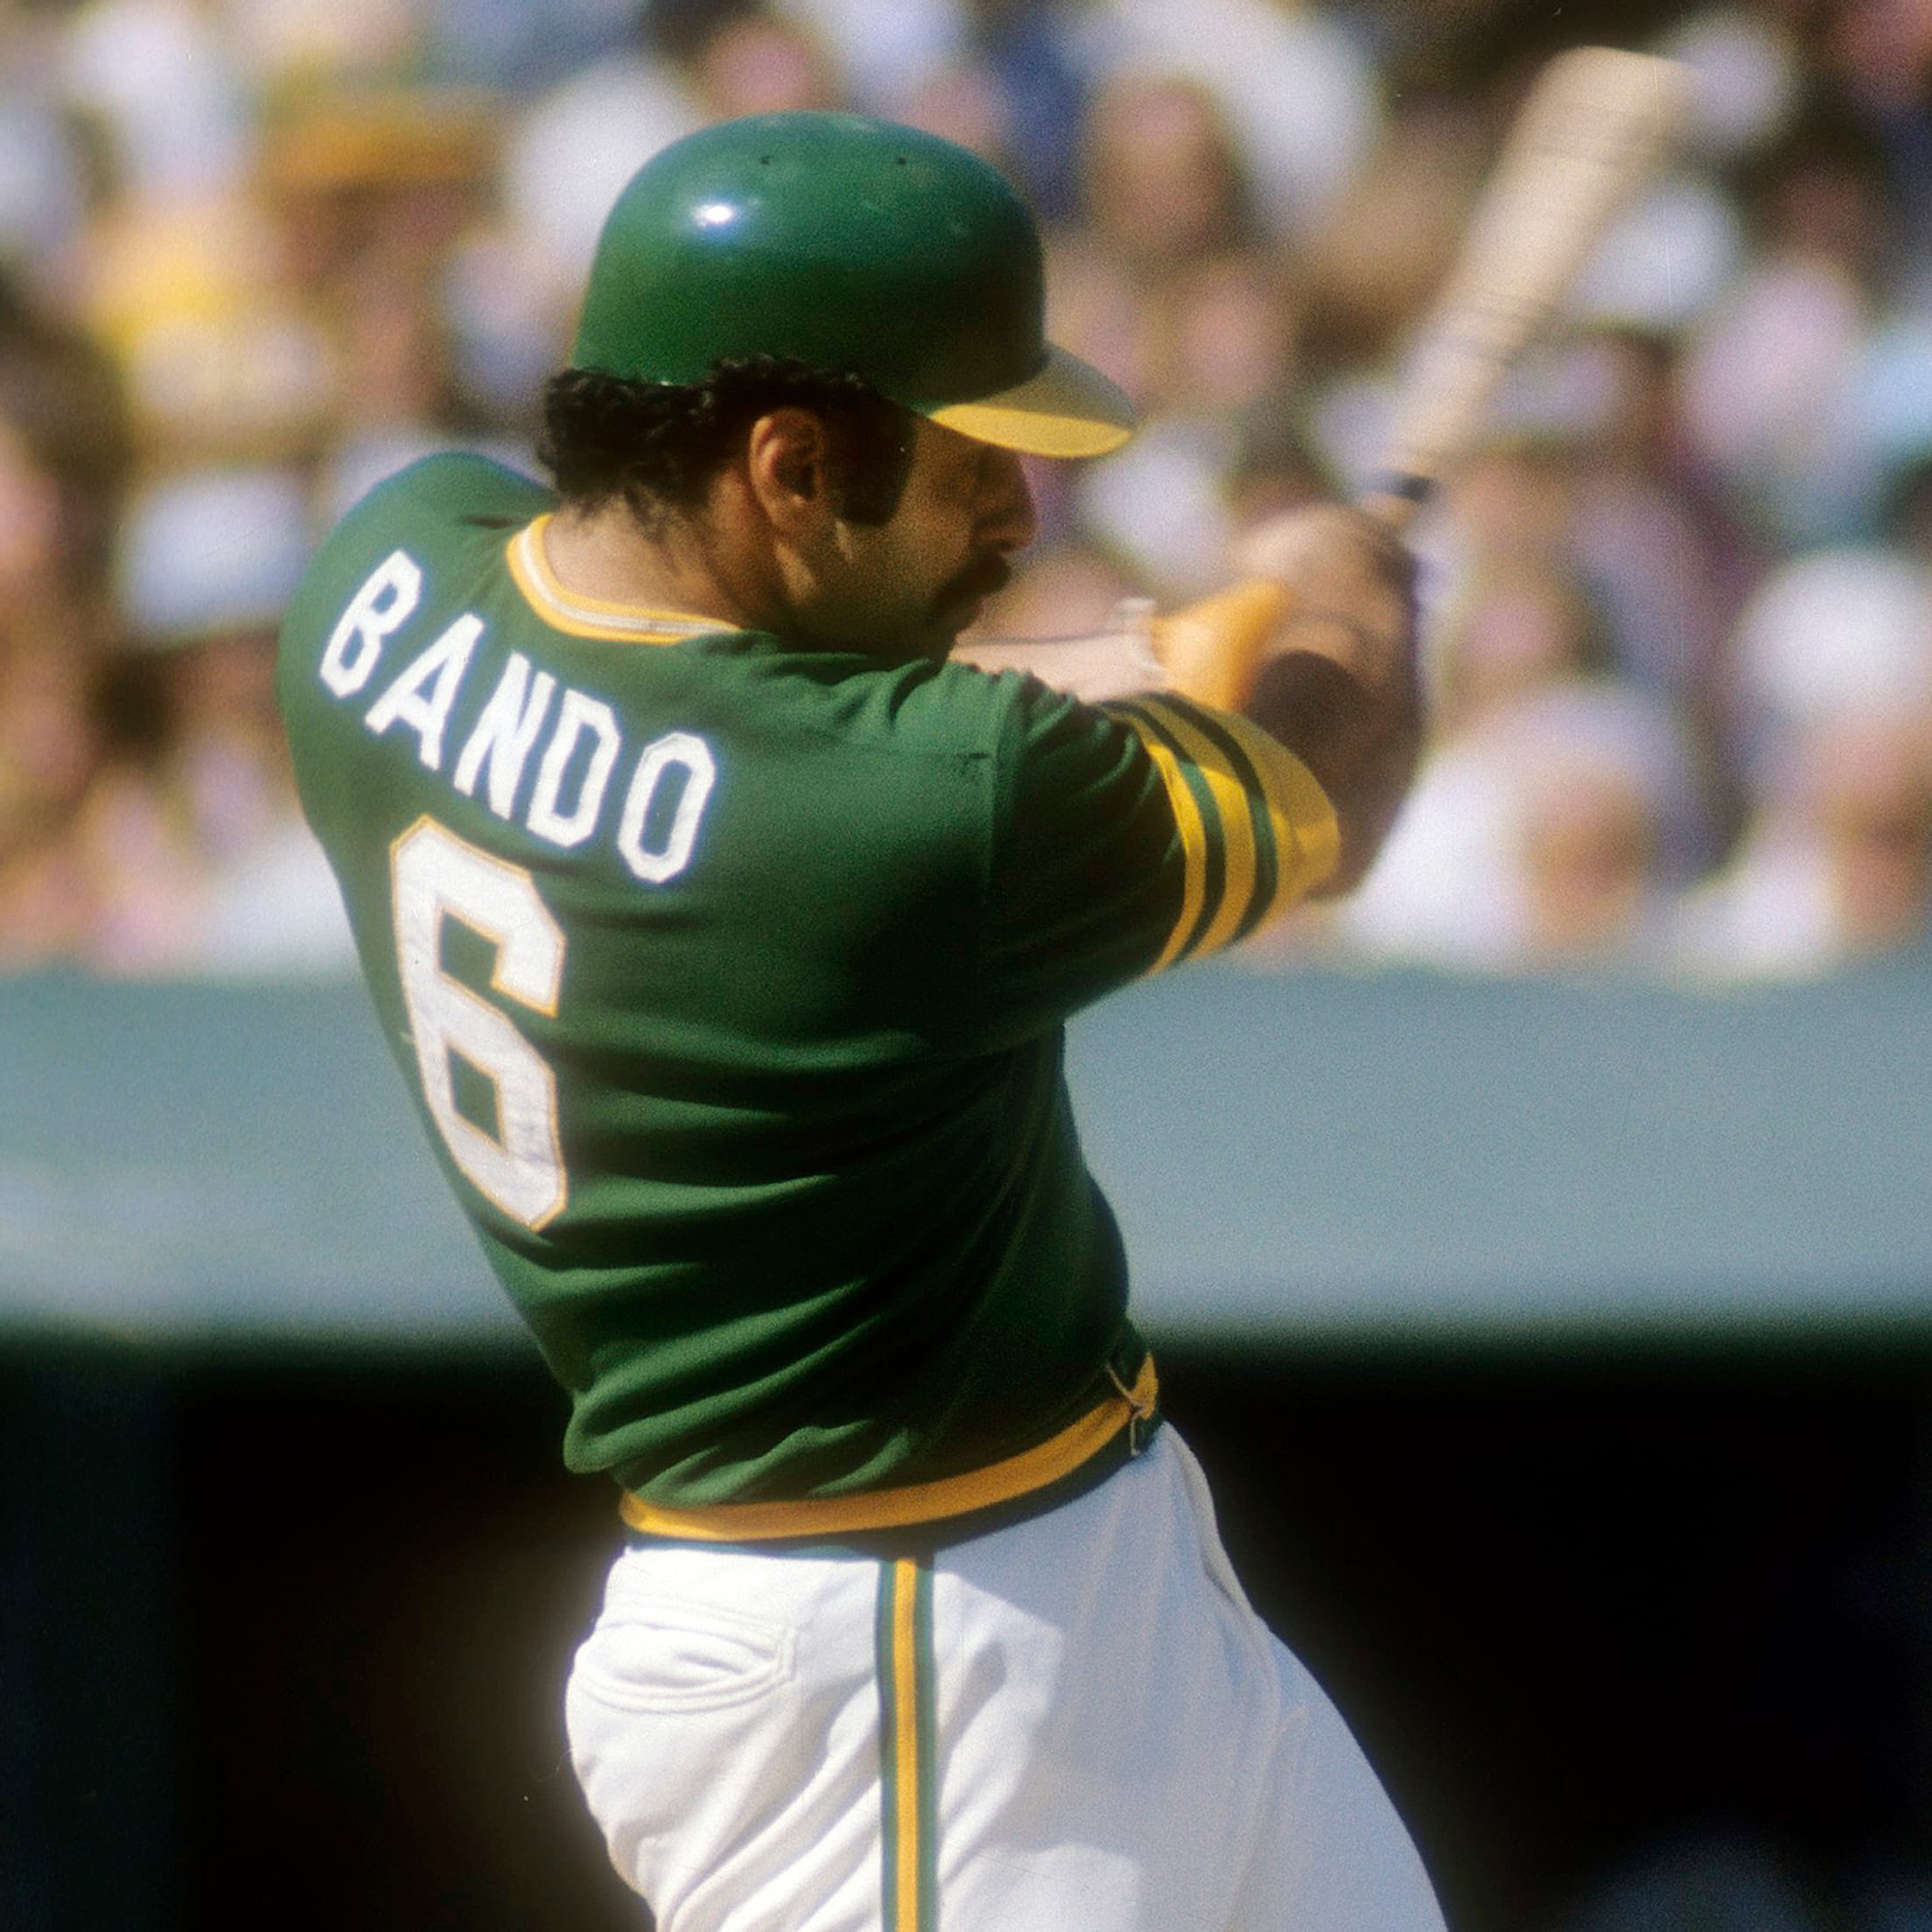 Oakland A's announce 2023 Hall of Fame class